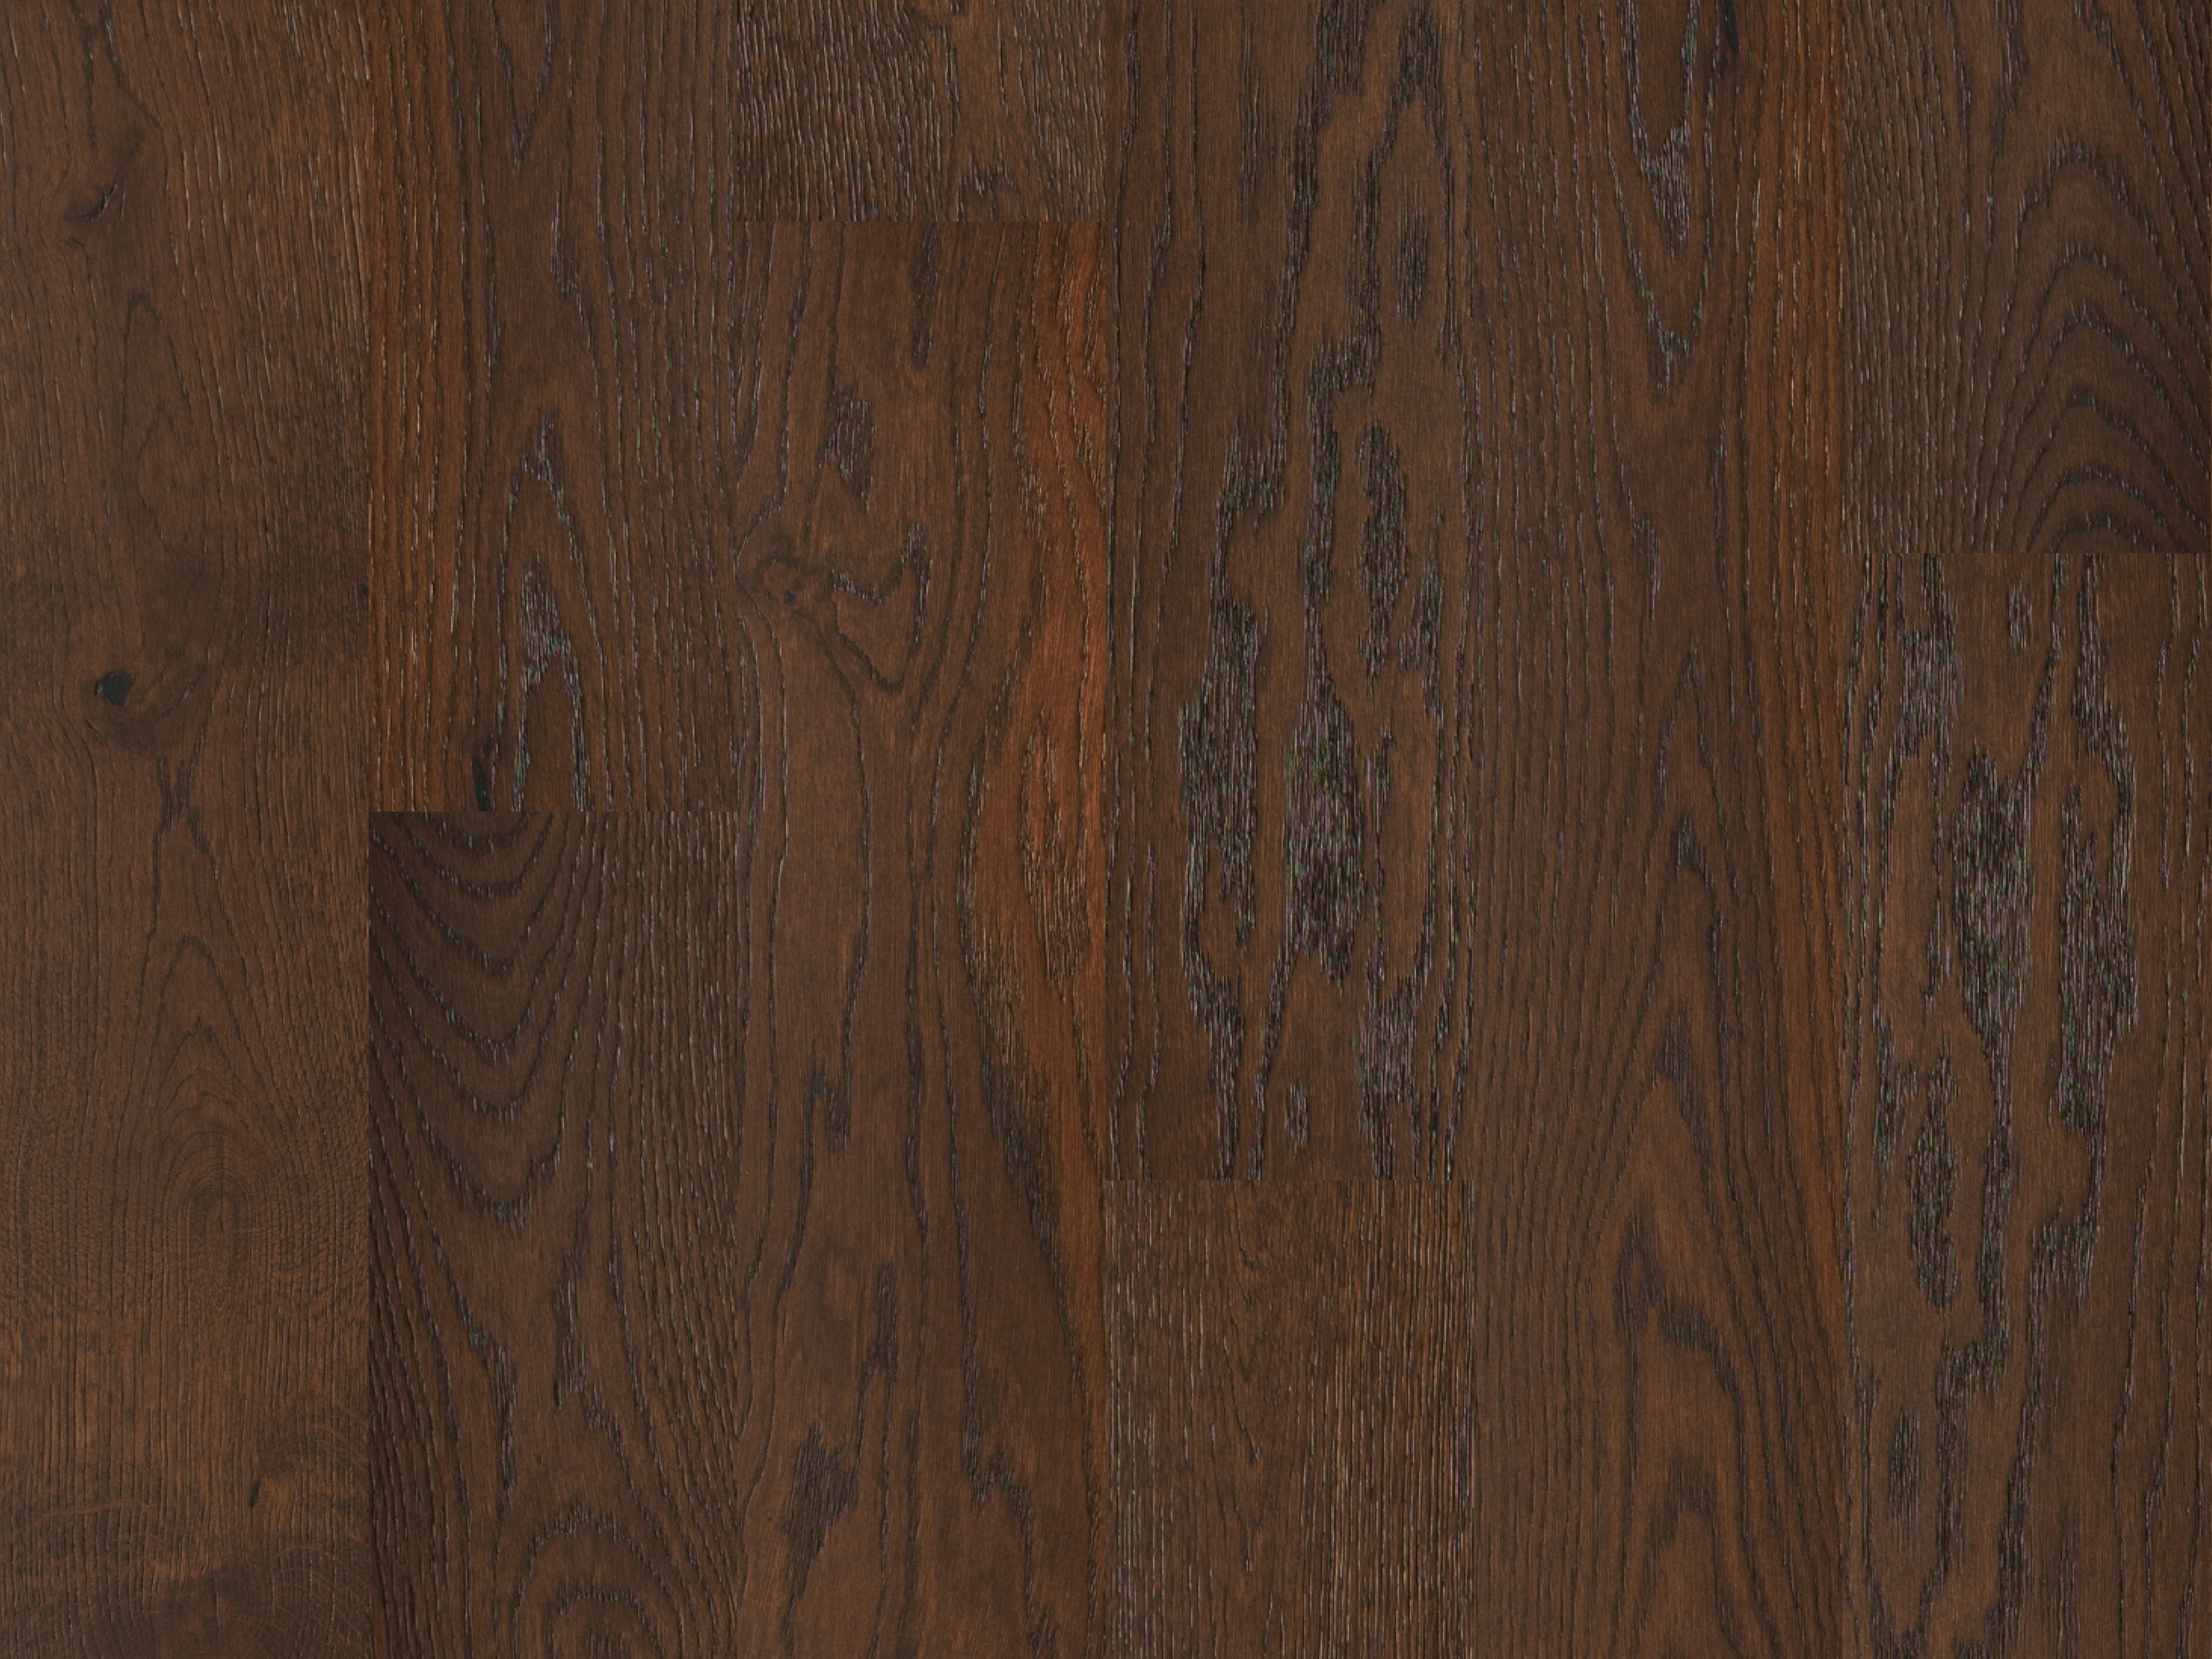 duchateau the guild lineage sophia european oak engineered hardnatural wood floor uv lacquer finish for interior use distributed by surface group international